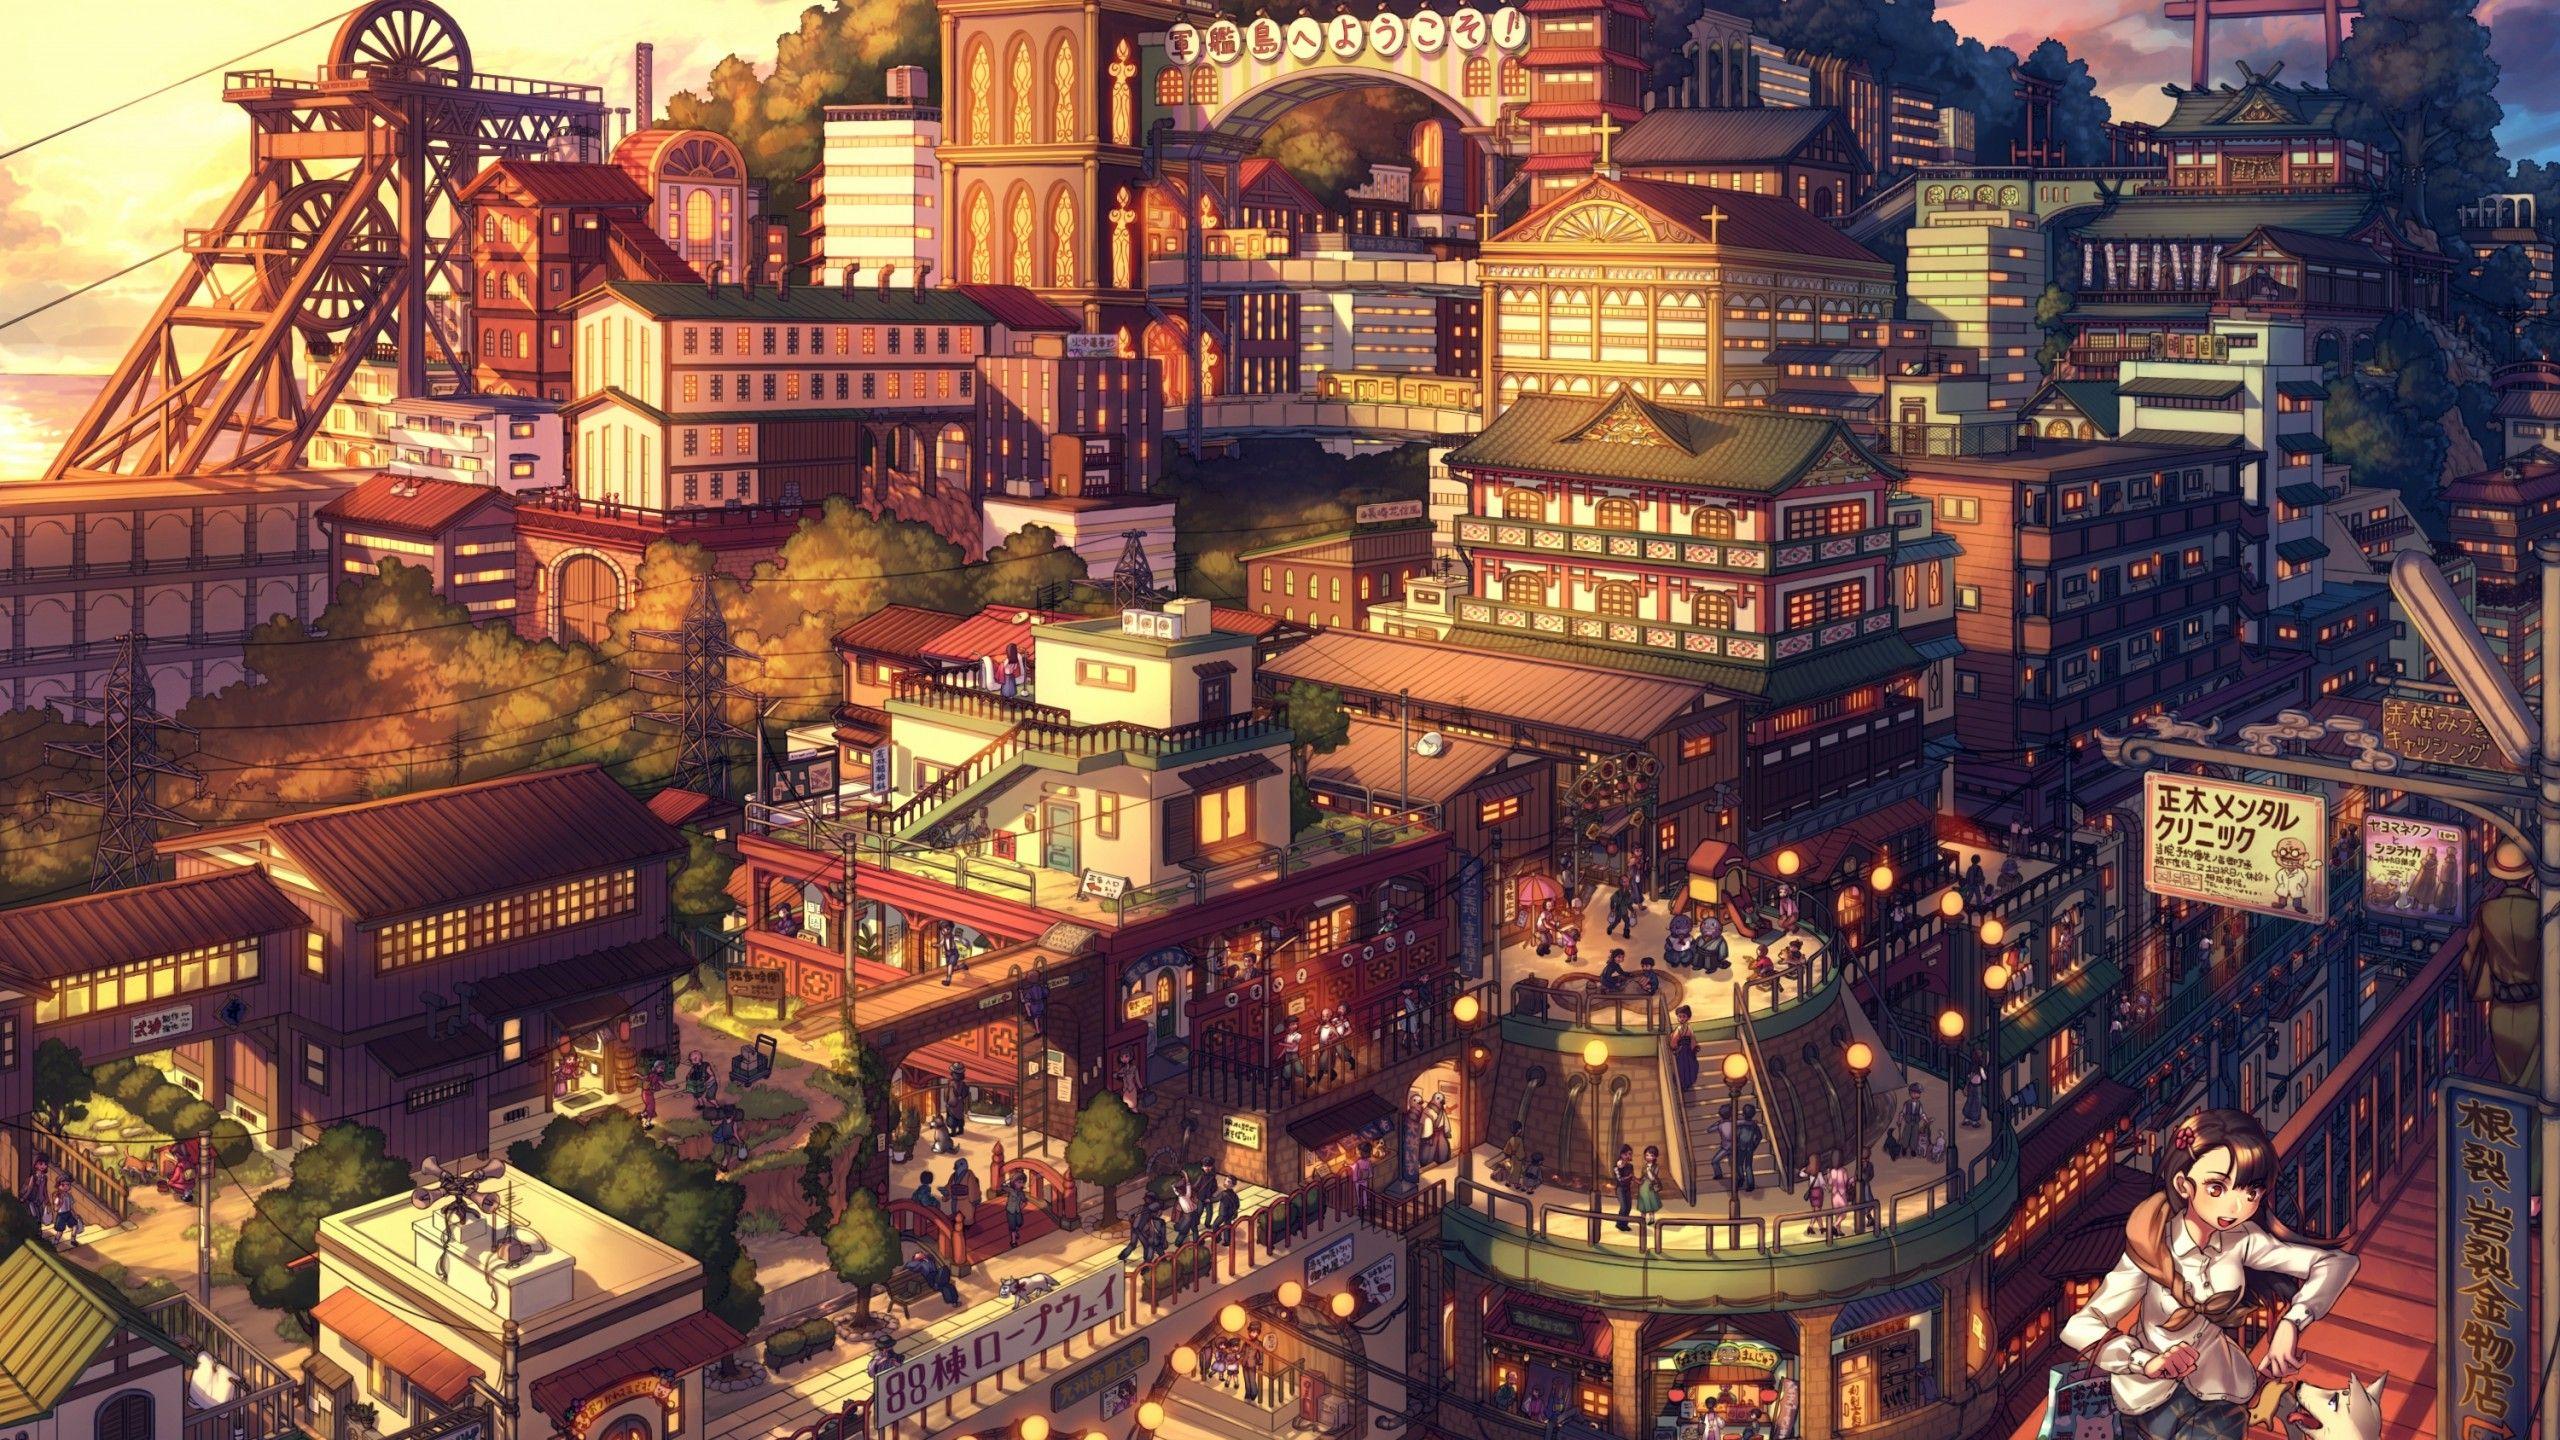 Download 2560x1440 Anime Landscape, Cityscape, People, Japanese